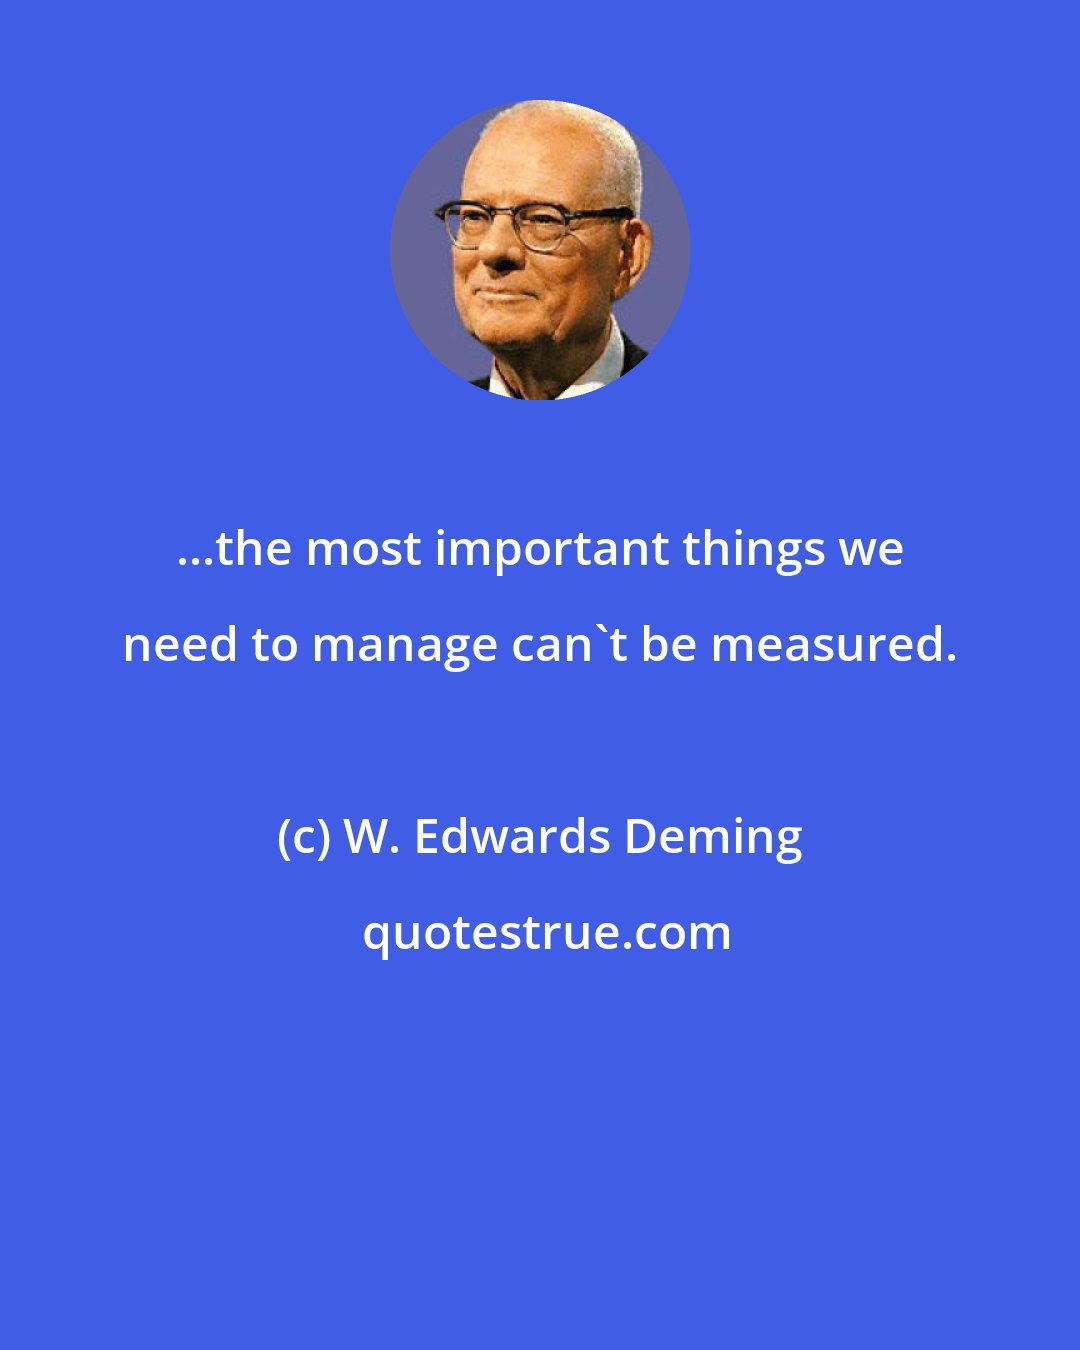 W. Edwards Deming: ...the most important things we need to manage can't be measured.